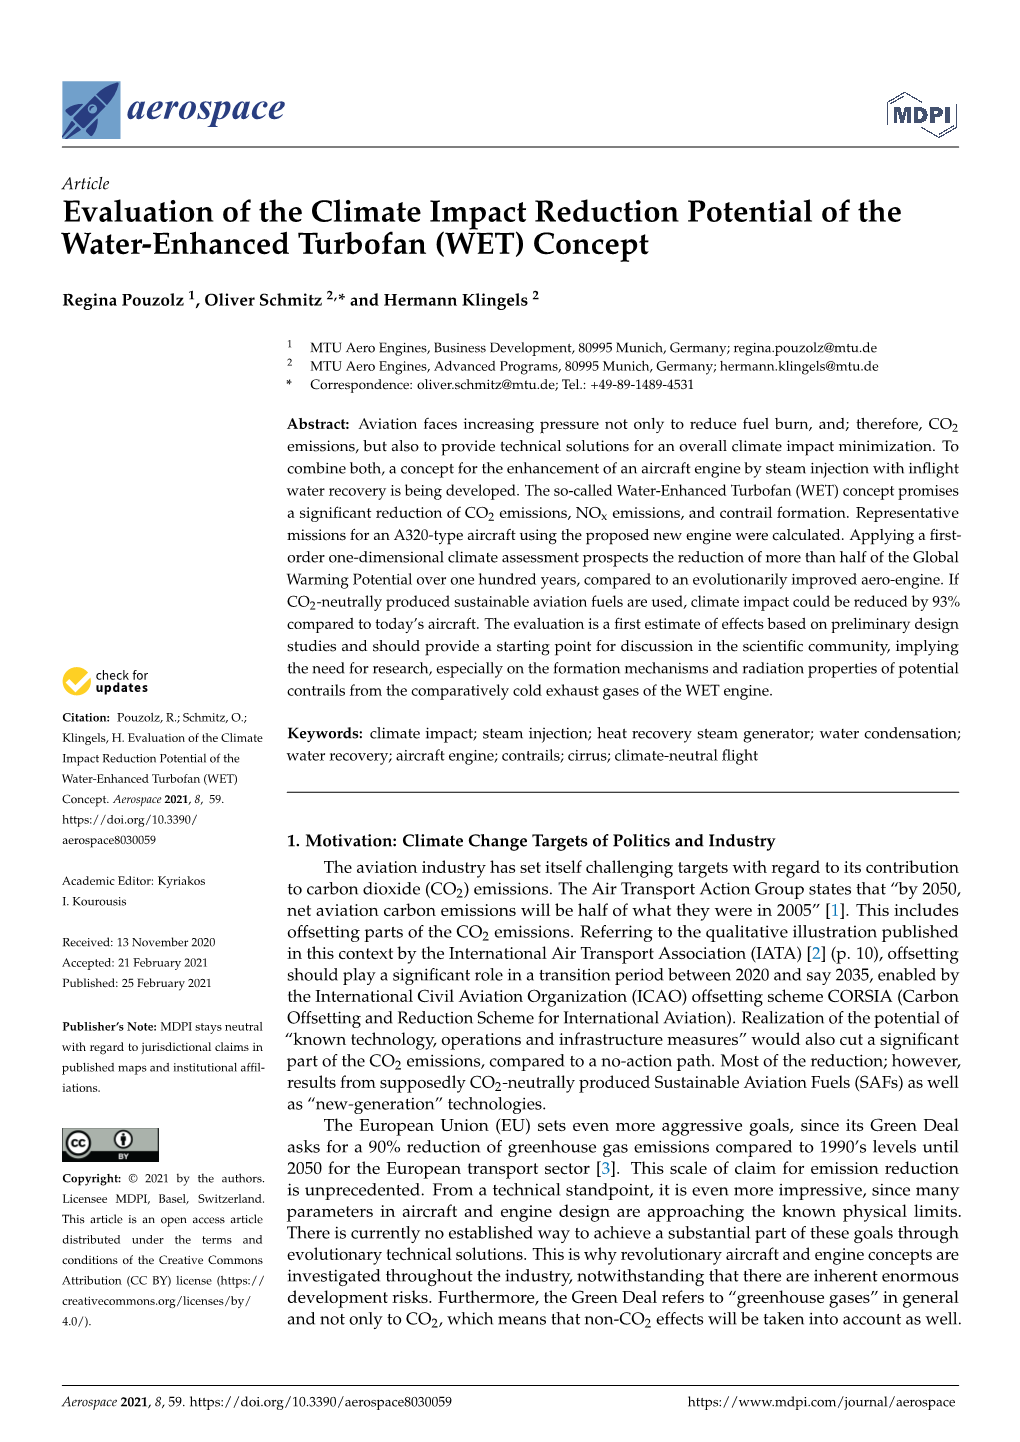 Evaluation of the Climate Impact Reduction Potential of the Water-Enhanced Turbofan (WET) Concept